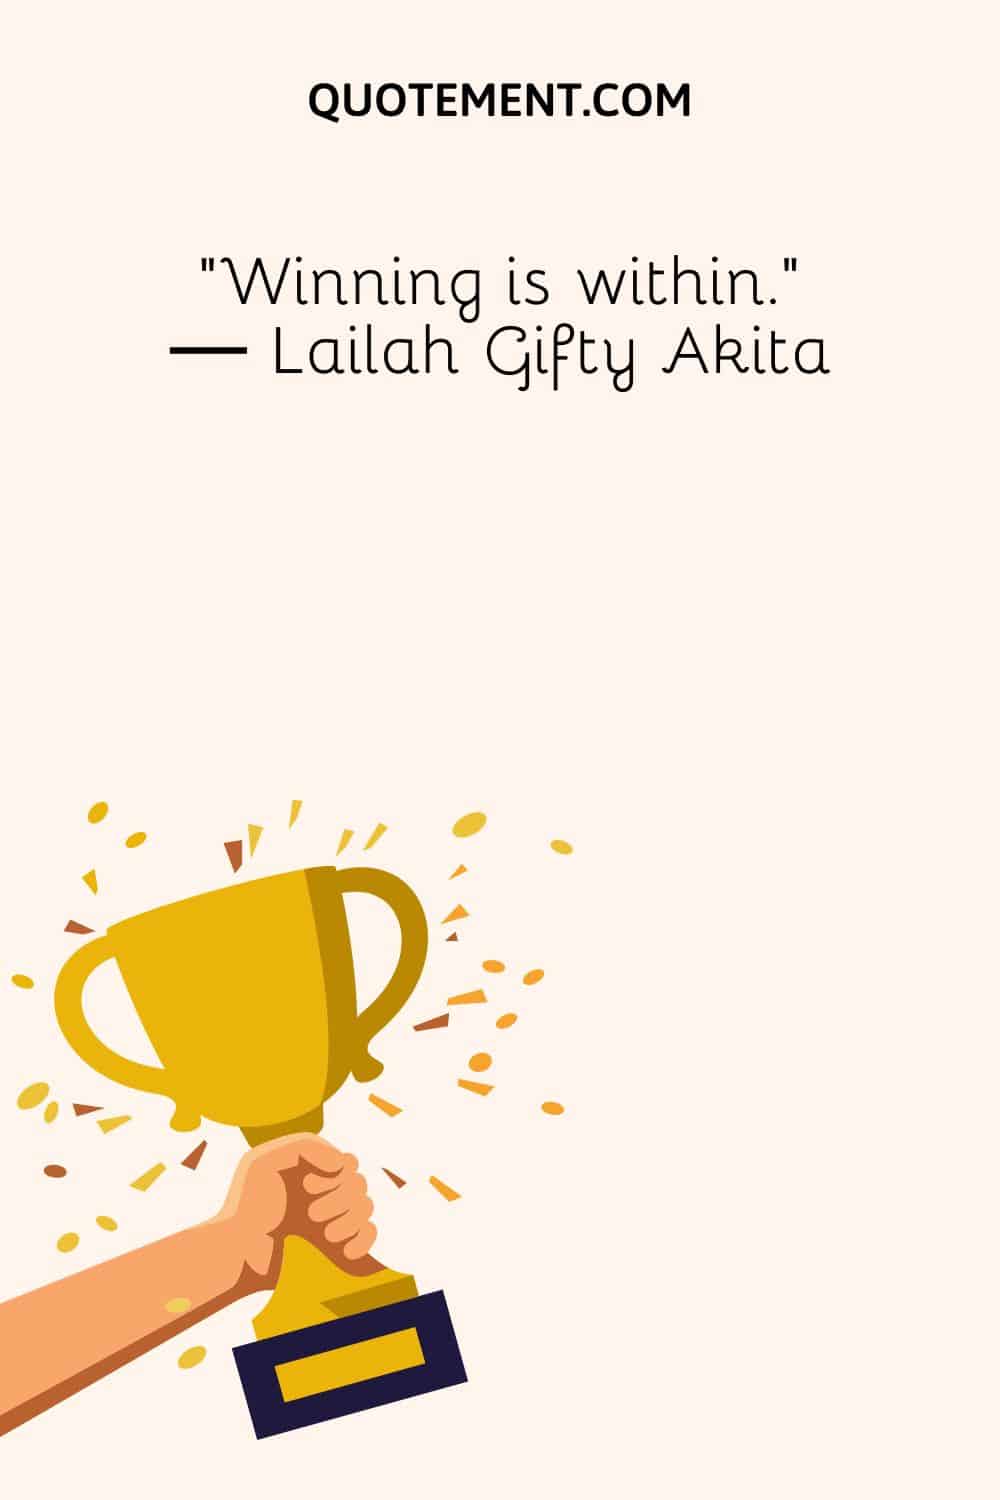 “Winning is within.” ― Lailah Gifty Akita